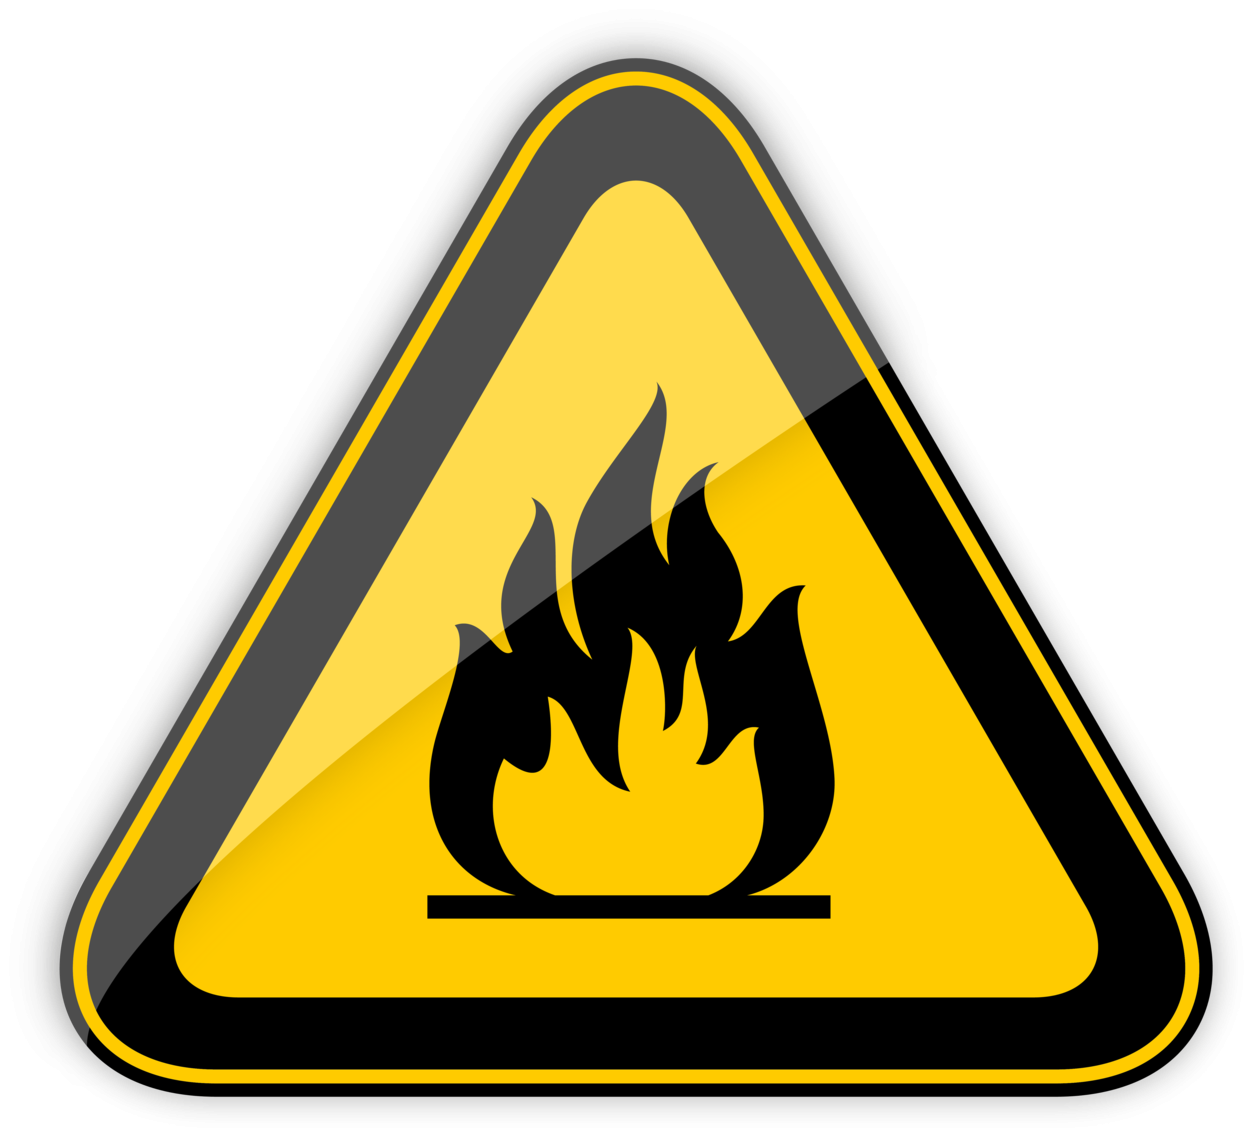 Highly Flammable Warning Sign PNG Clipart